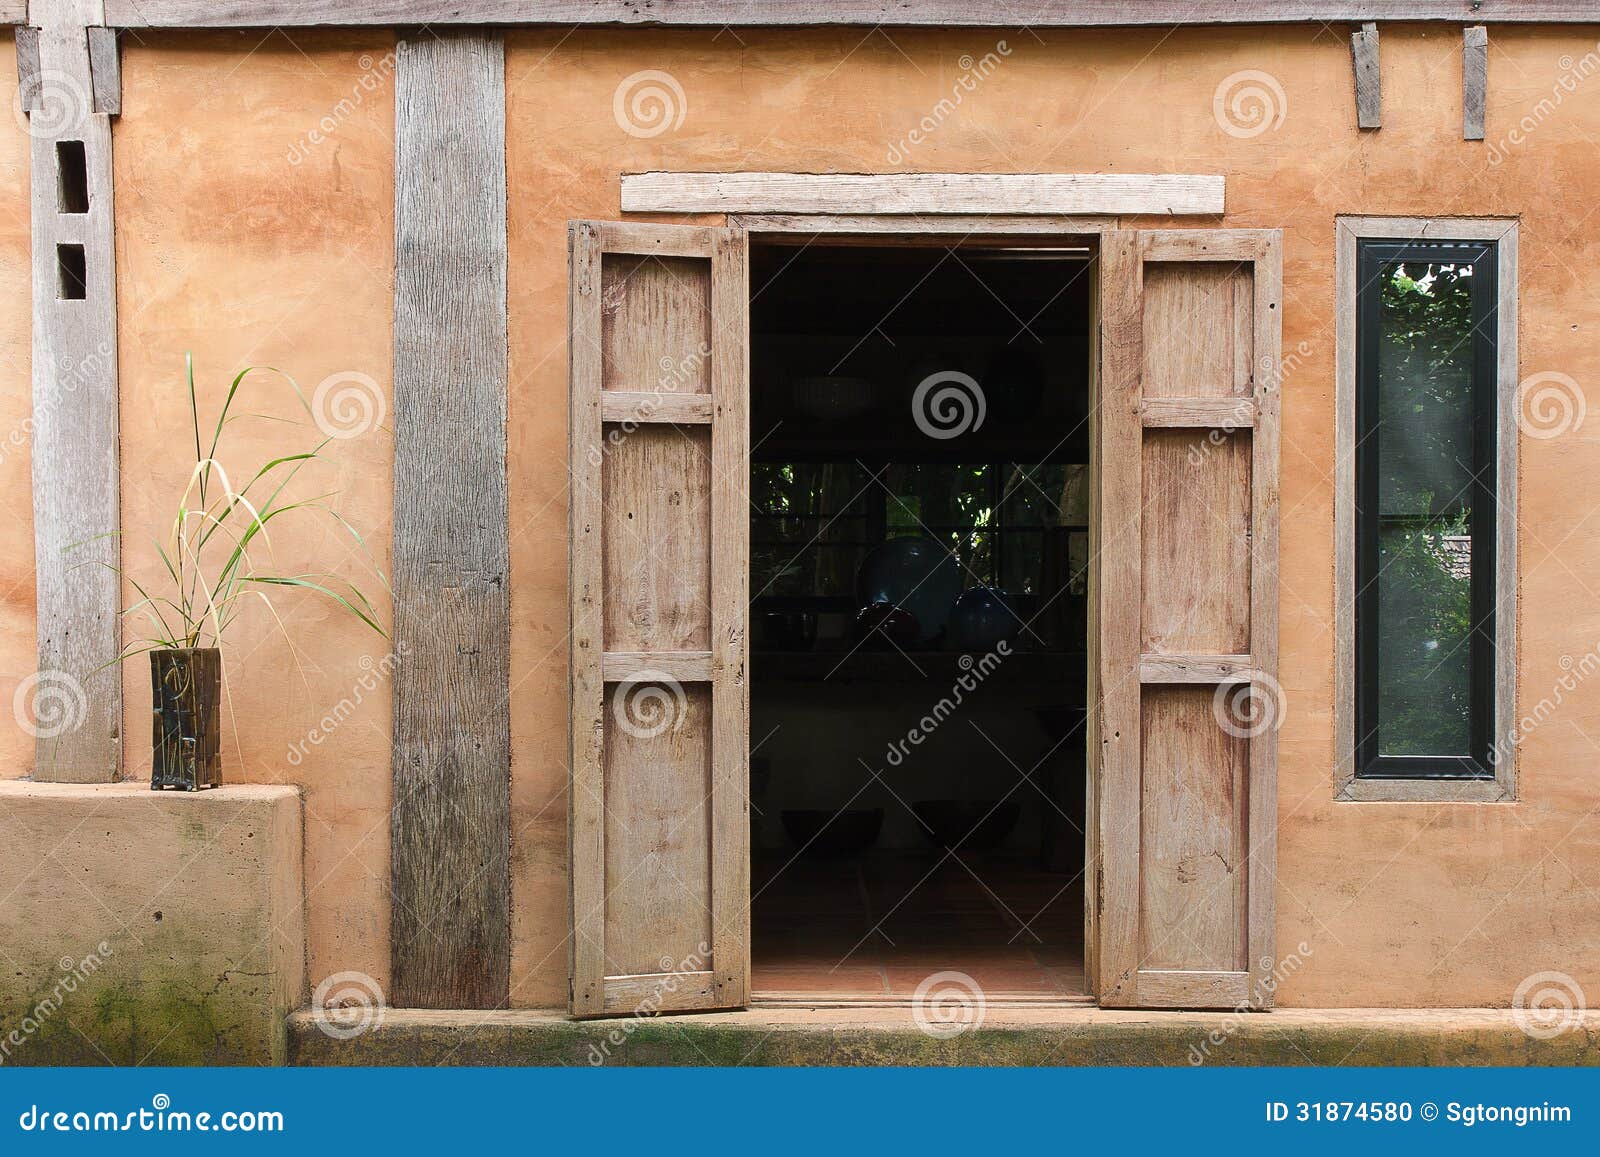 Old Town House Village Home Design Stock Photo - Image: 31874580